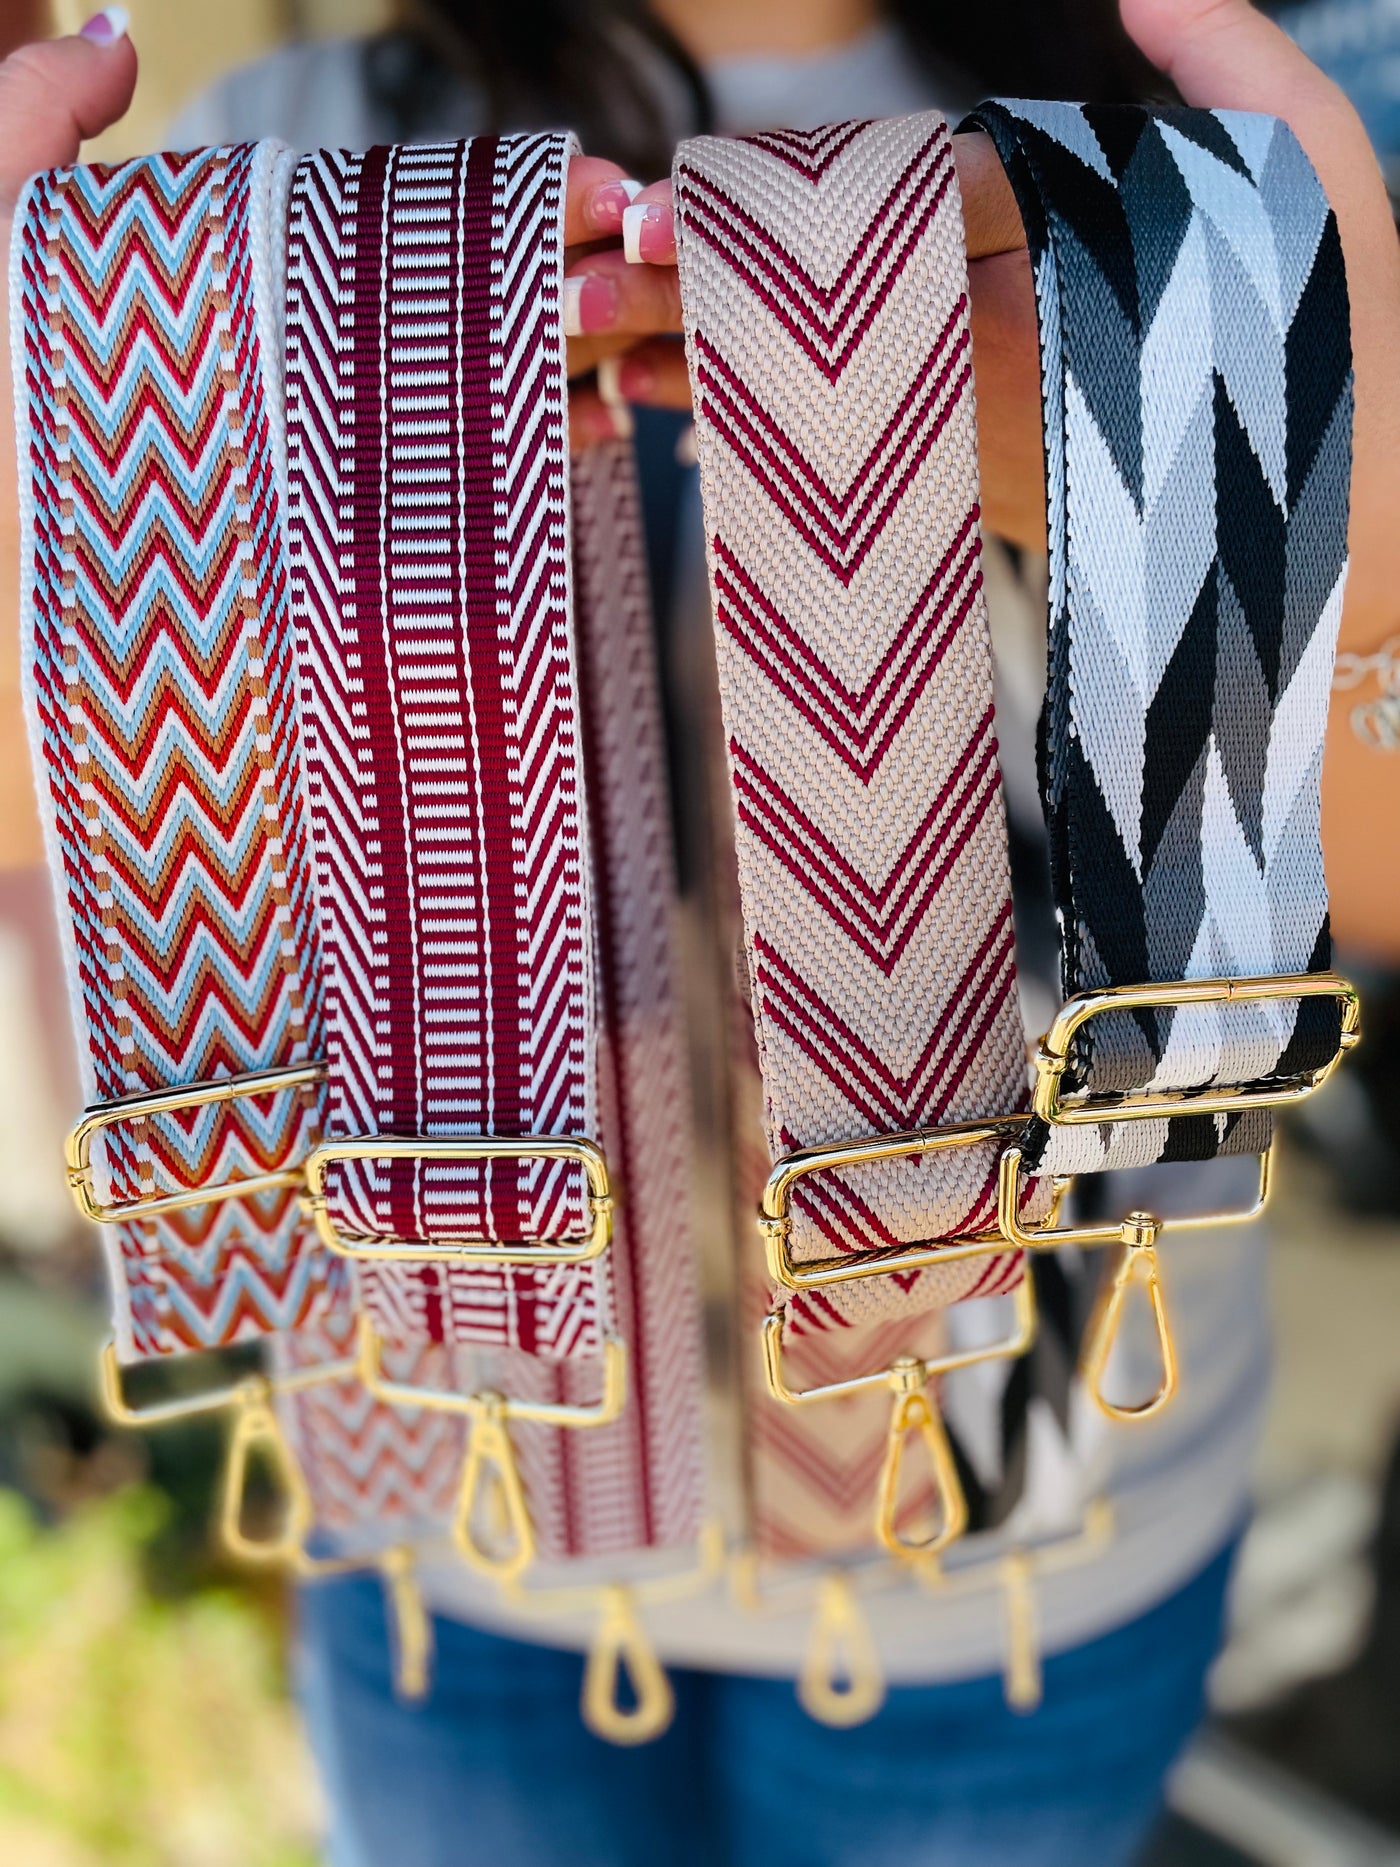 The Striped Purse Strap (4 Styles)